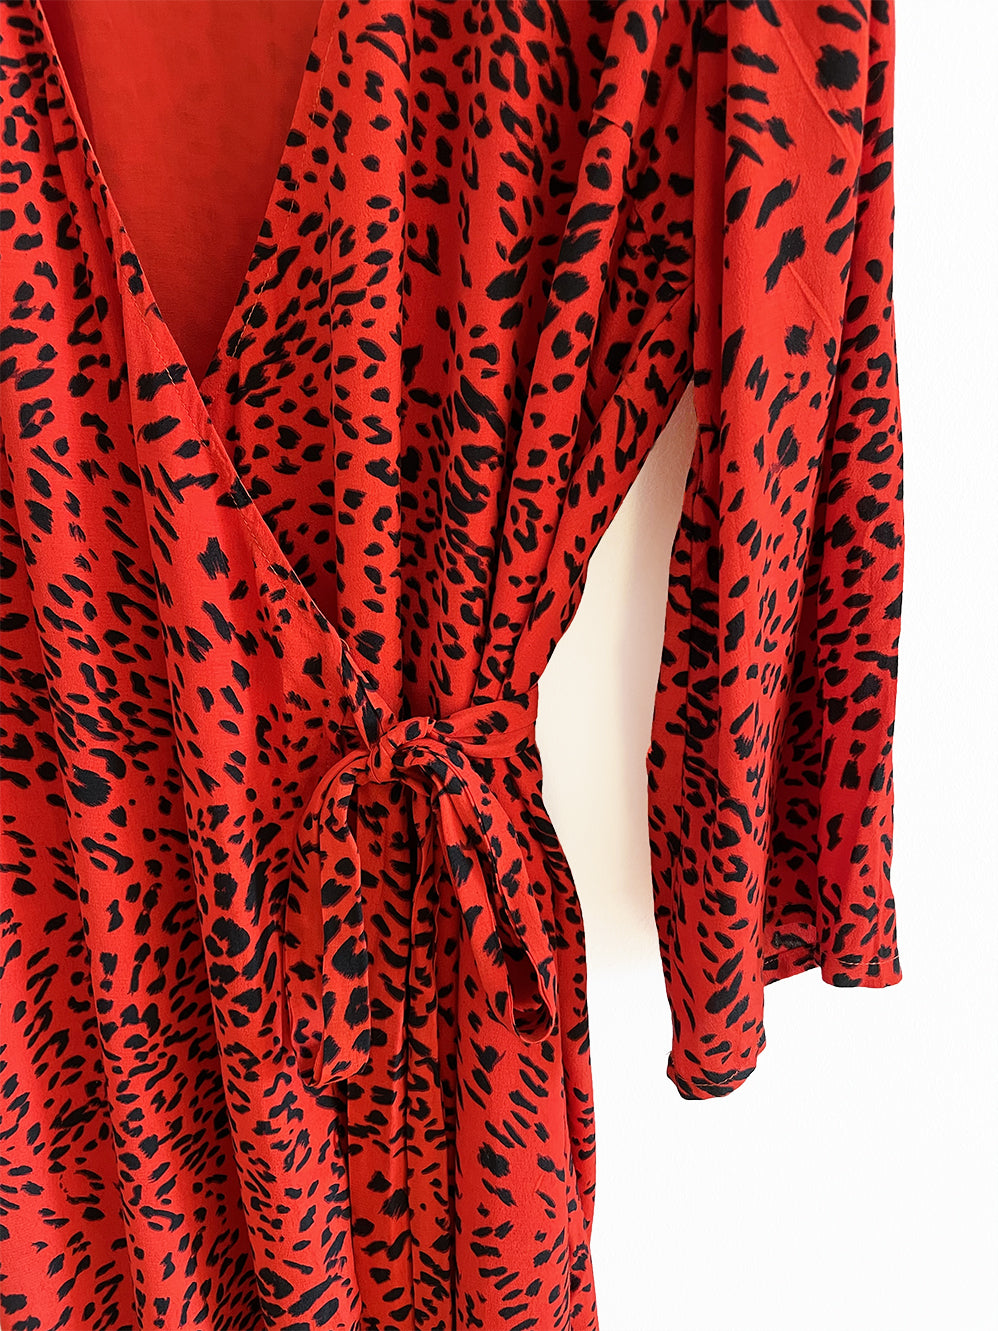 Red Wrap Dress with Animal Print, Size M